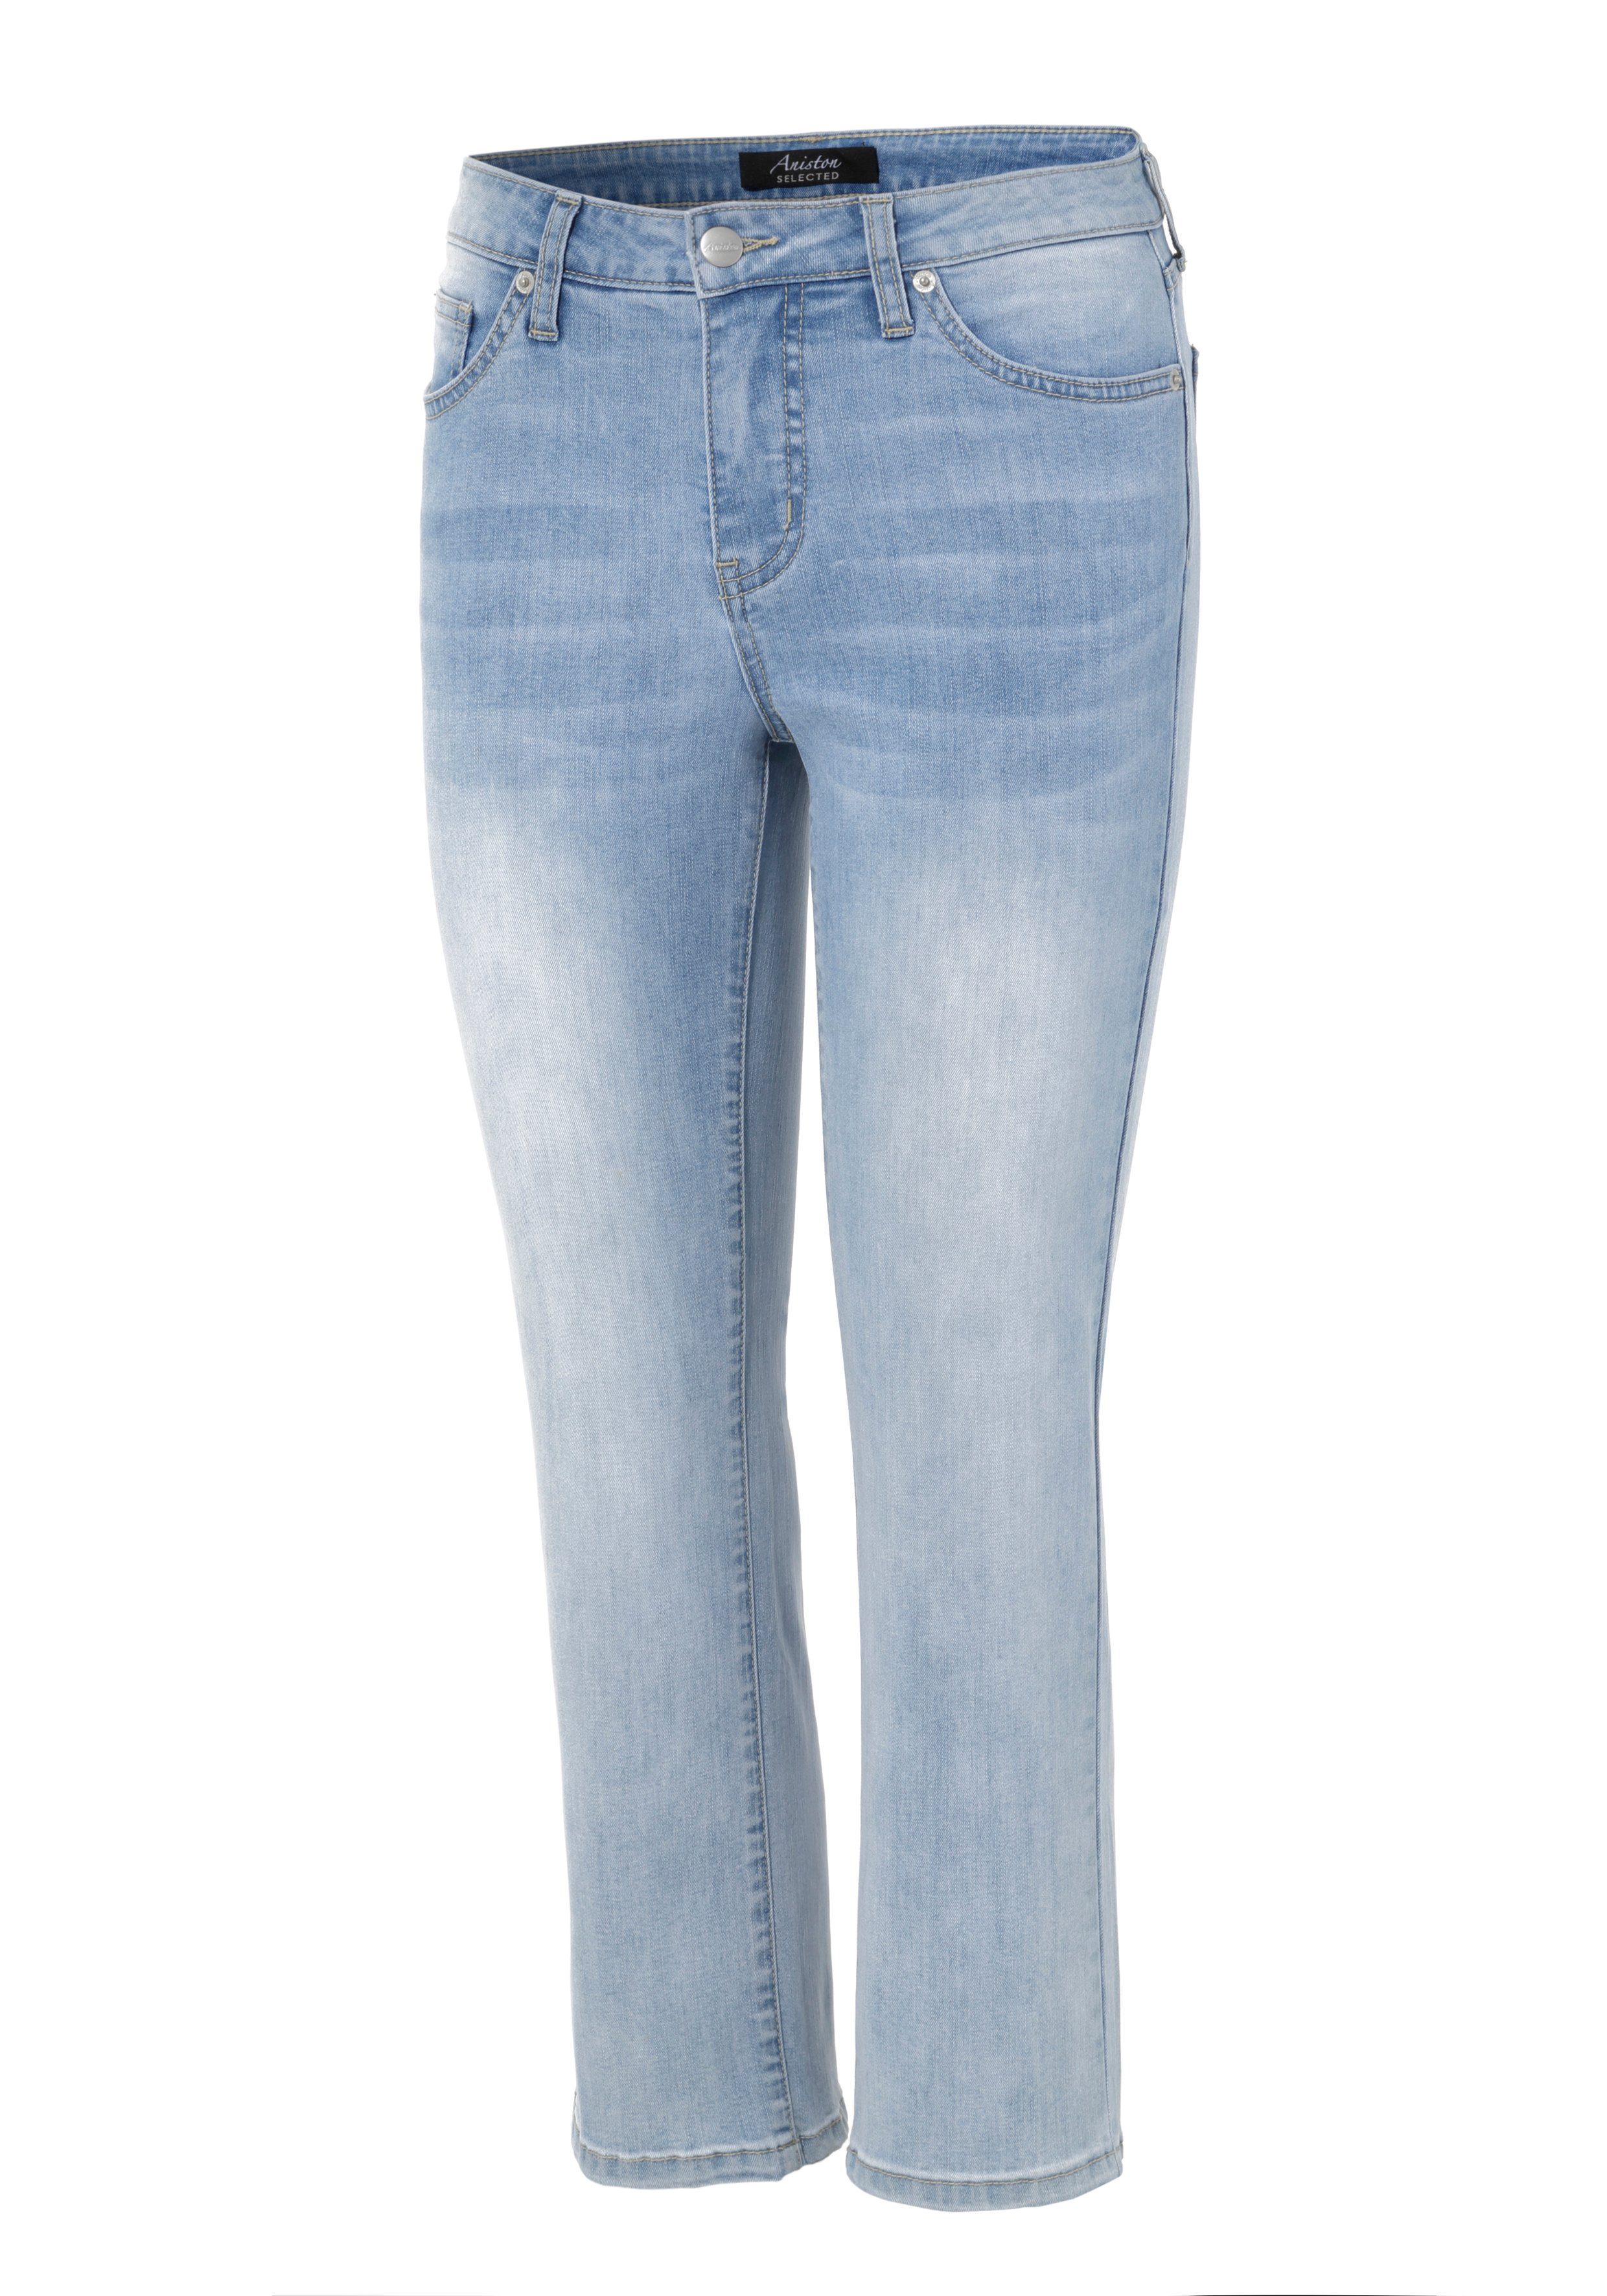 Aniston SELECTED Straight-Jeans in verkürzter light-blue-washed Länge cropped